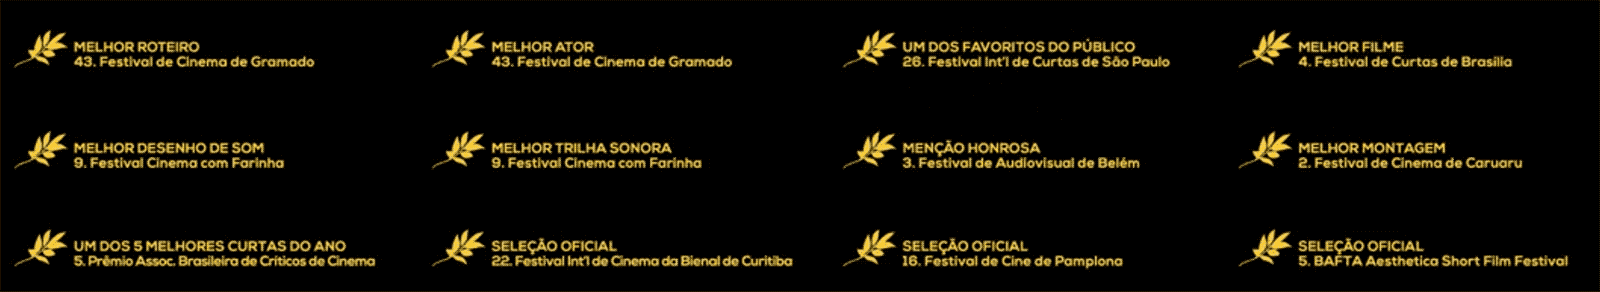 premiacoes-canalhas